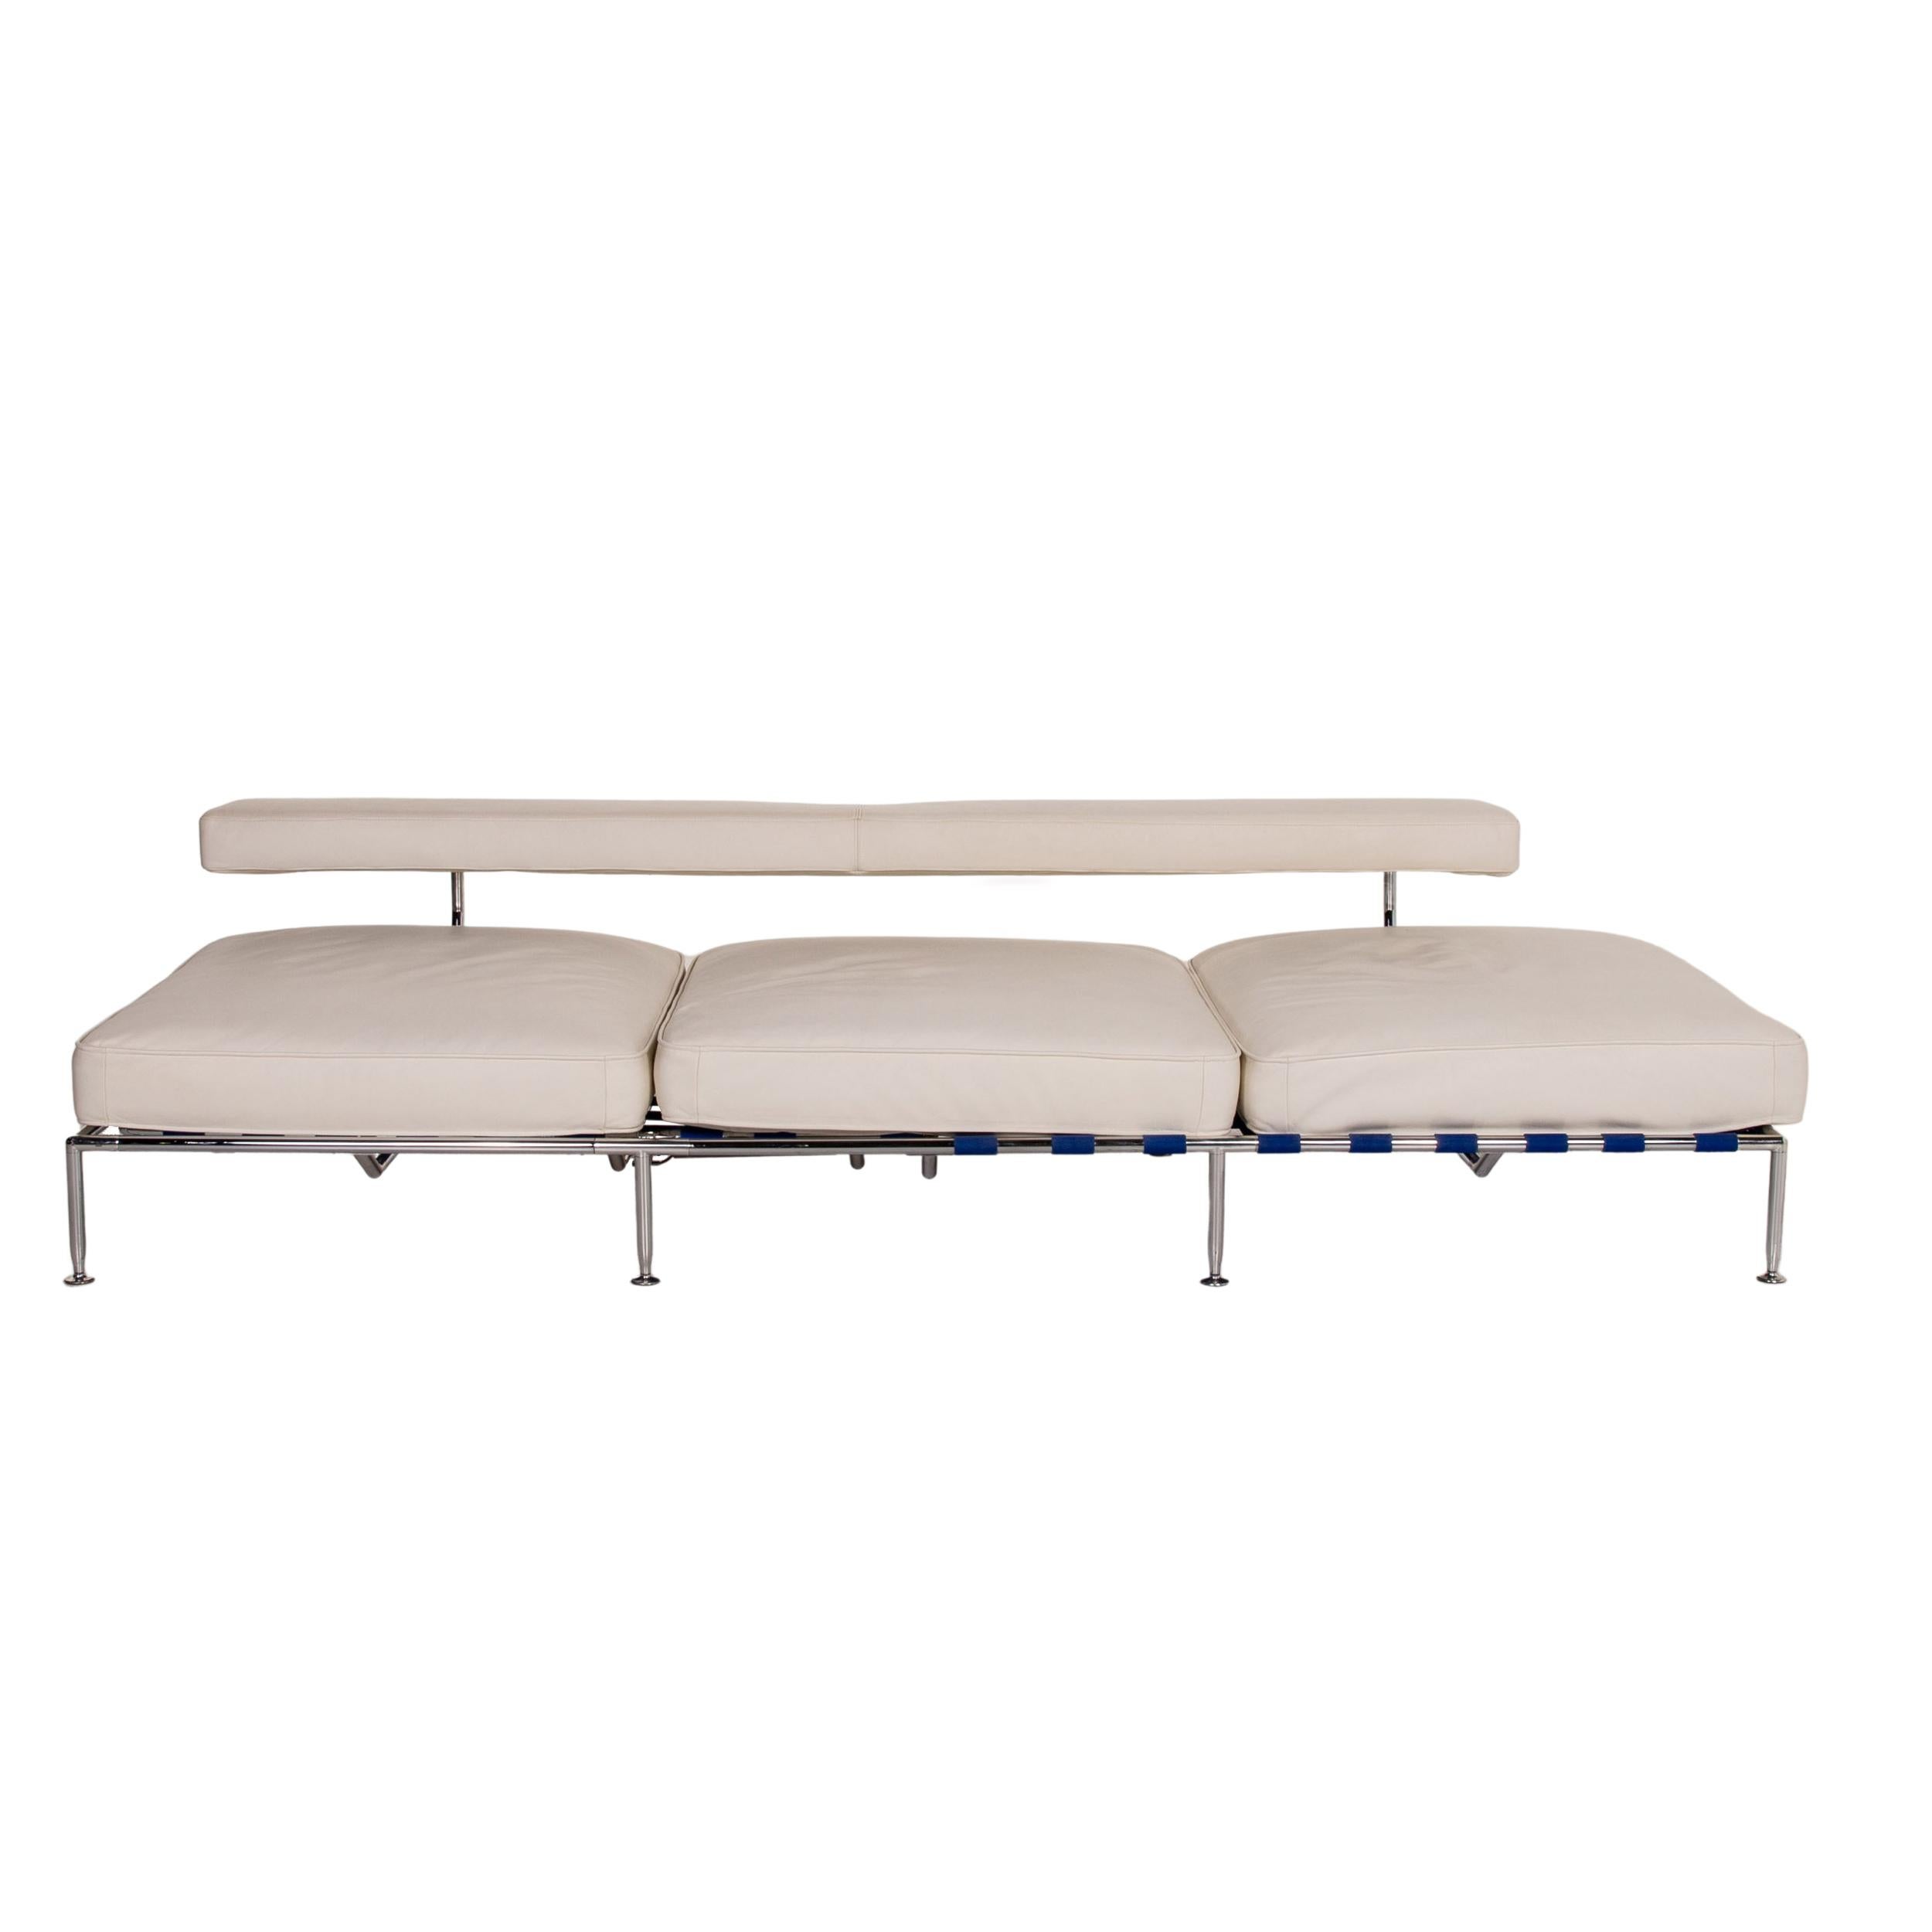 Contemporary B&B Italia Free Time Leather Lounger White Daybed Sleeping Function Sofa Bed